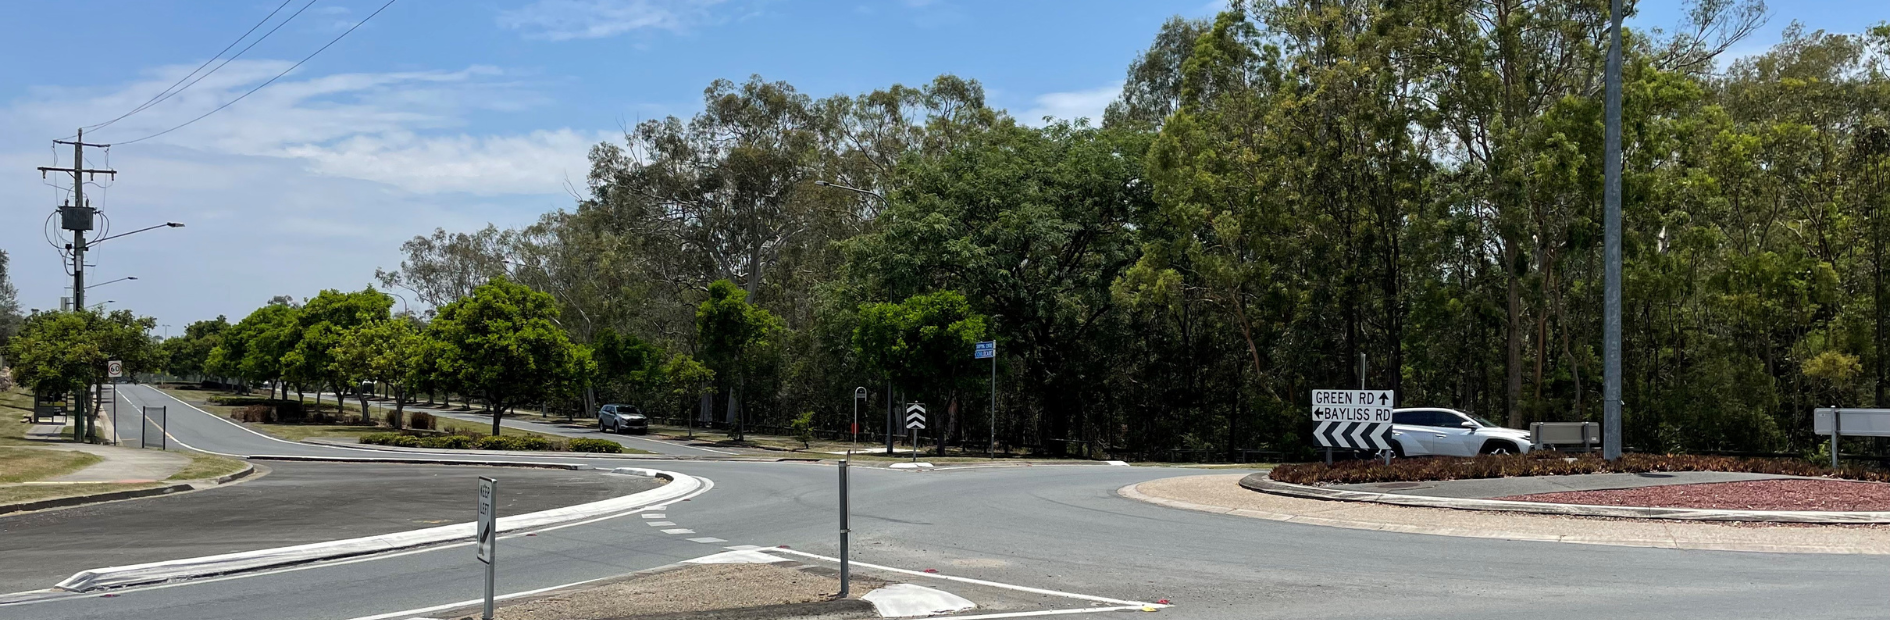 The Bayliss Road and Green Road intersection